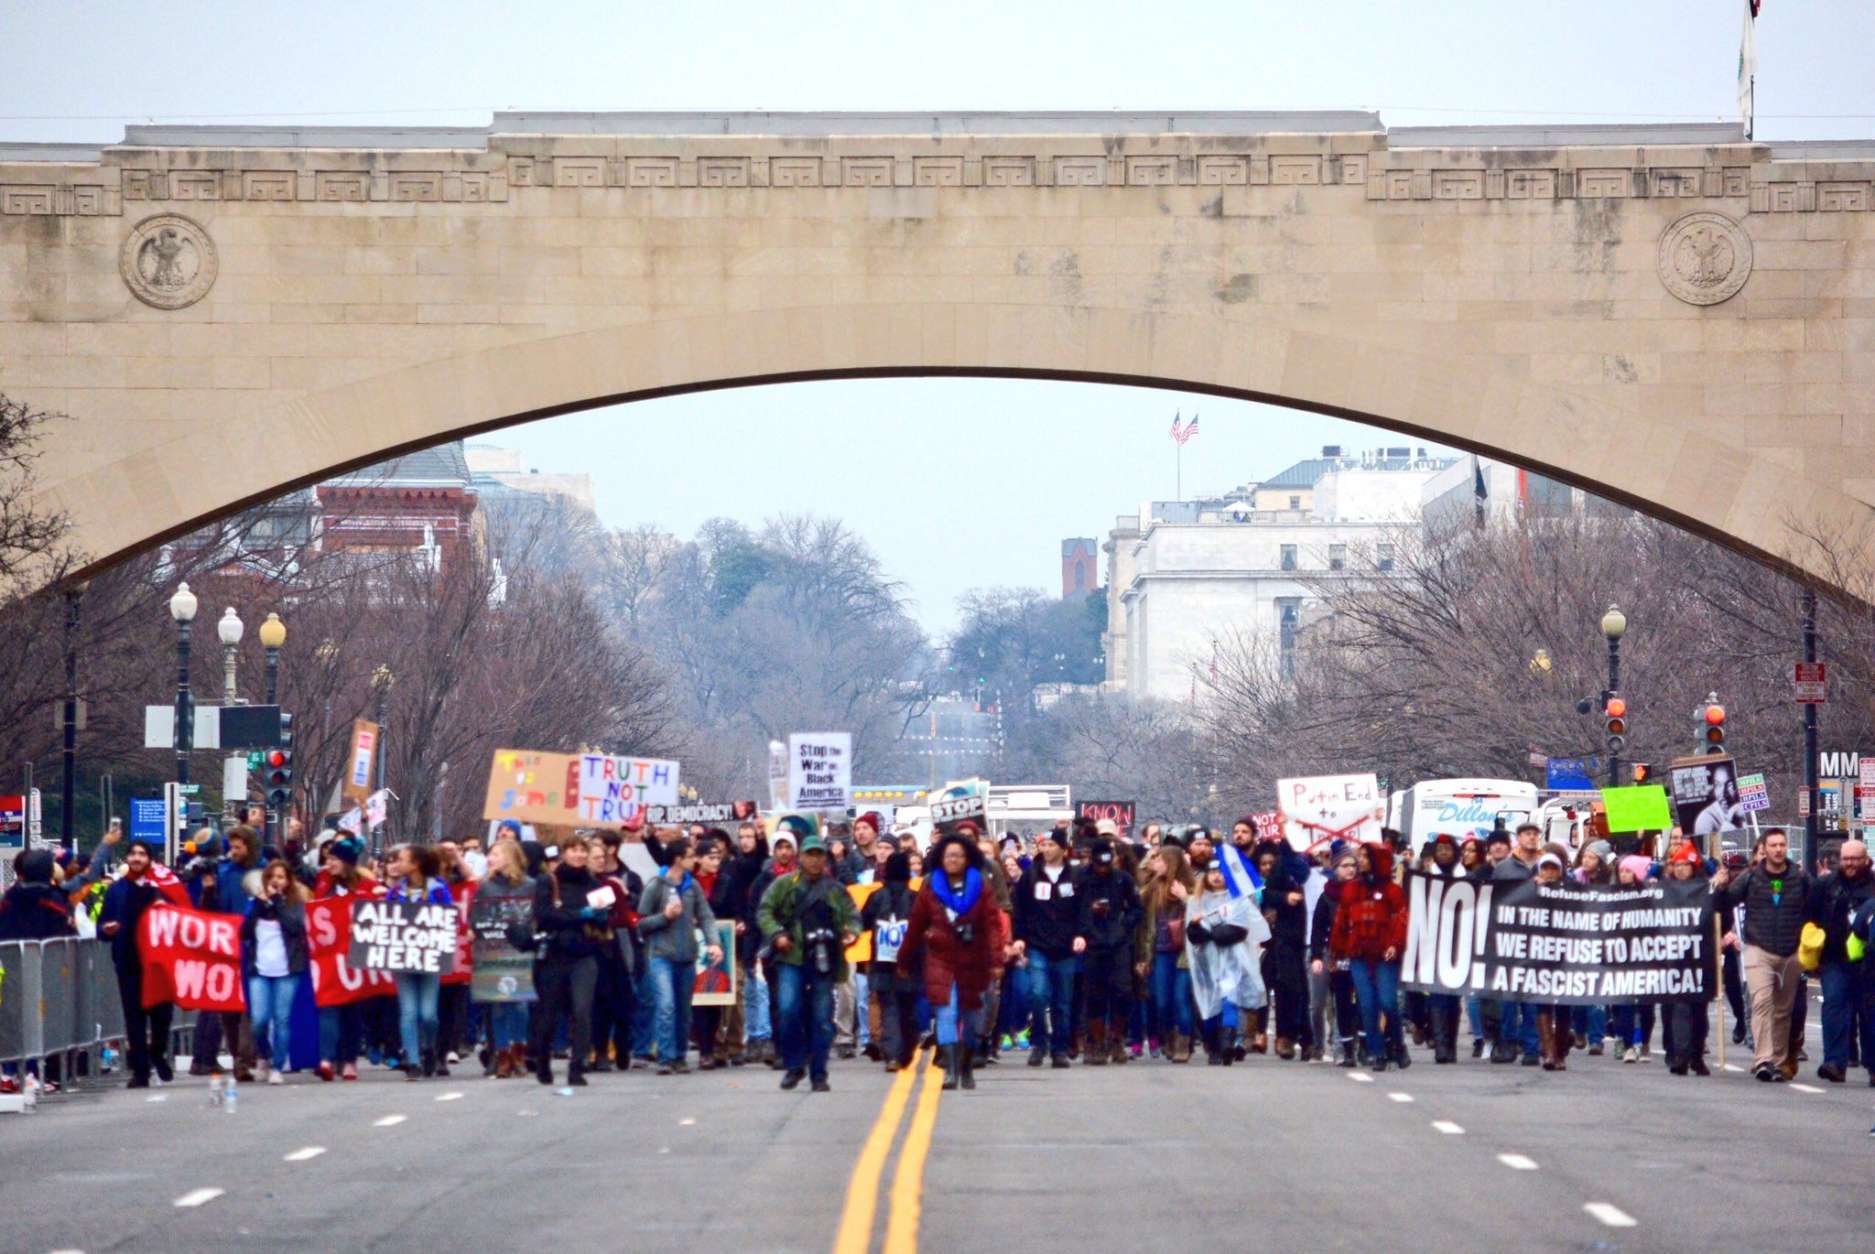 One of the larger demonstrations during President Trump's inauguration ceremony marched off the Interstate 395 Southwest Freeway onto Independence Avenue. (WTOP/Dave Dildine)